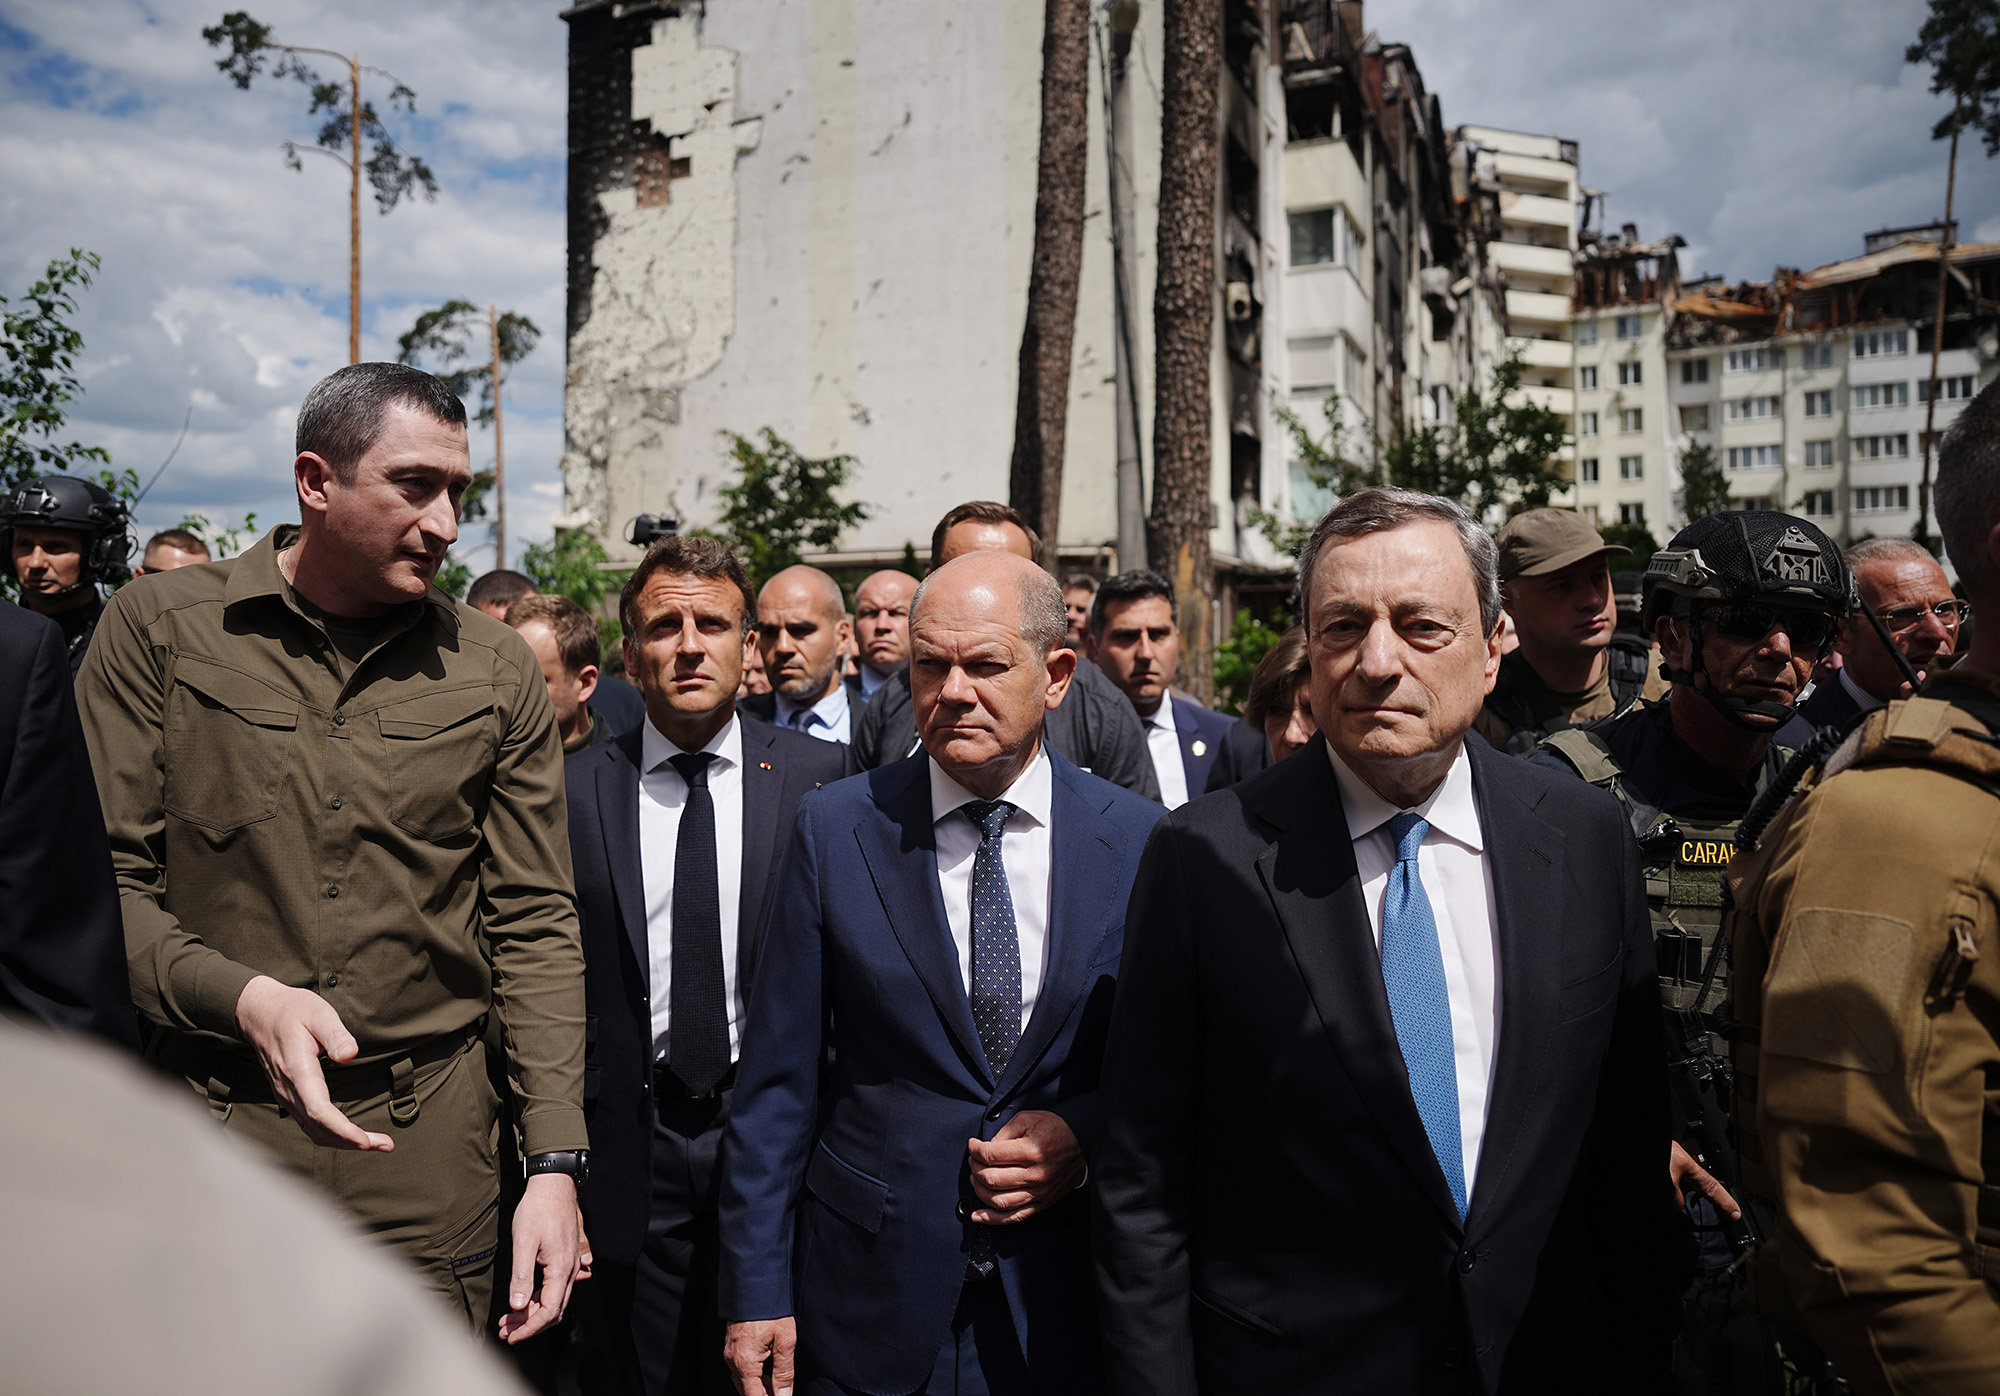 Oleksiy Chernyshov, Ukrainian President Zelensky's special envoy for EU accession, walks with French President Emmanuel Macron, German Chancellor Olaf Scholz and Italian PM Mario Draghi past destroyed buildings in Irpin, Ukraine, on June 16.